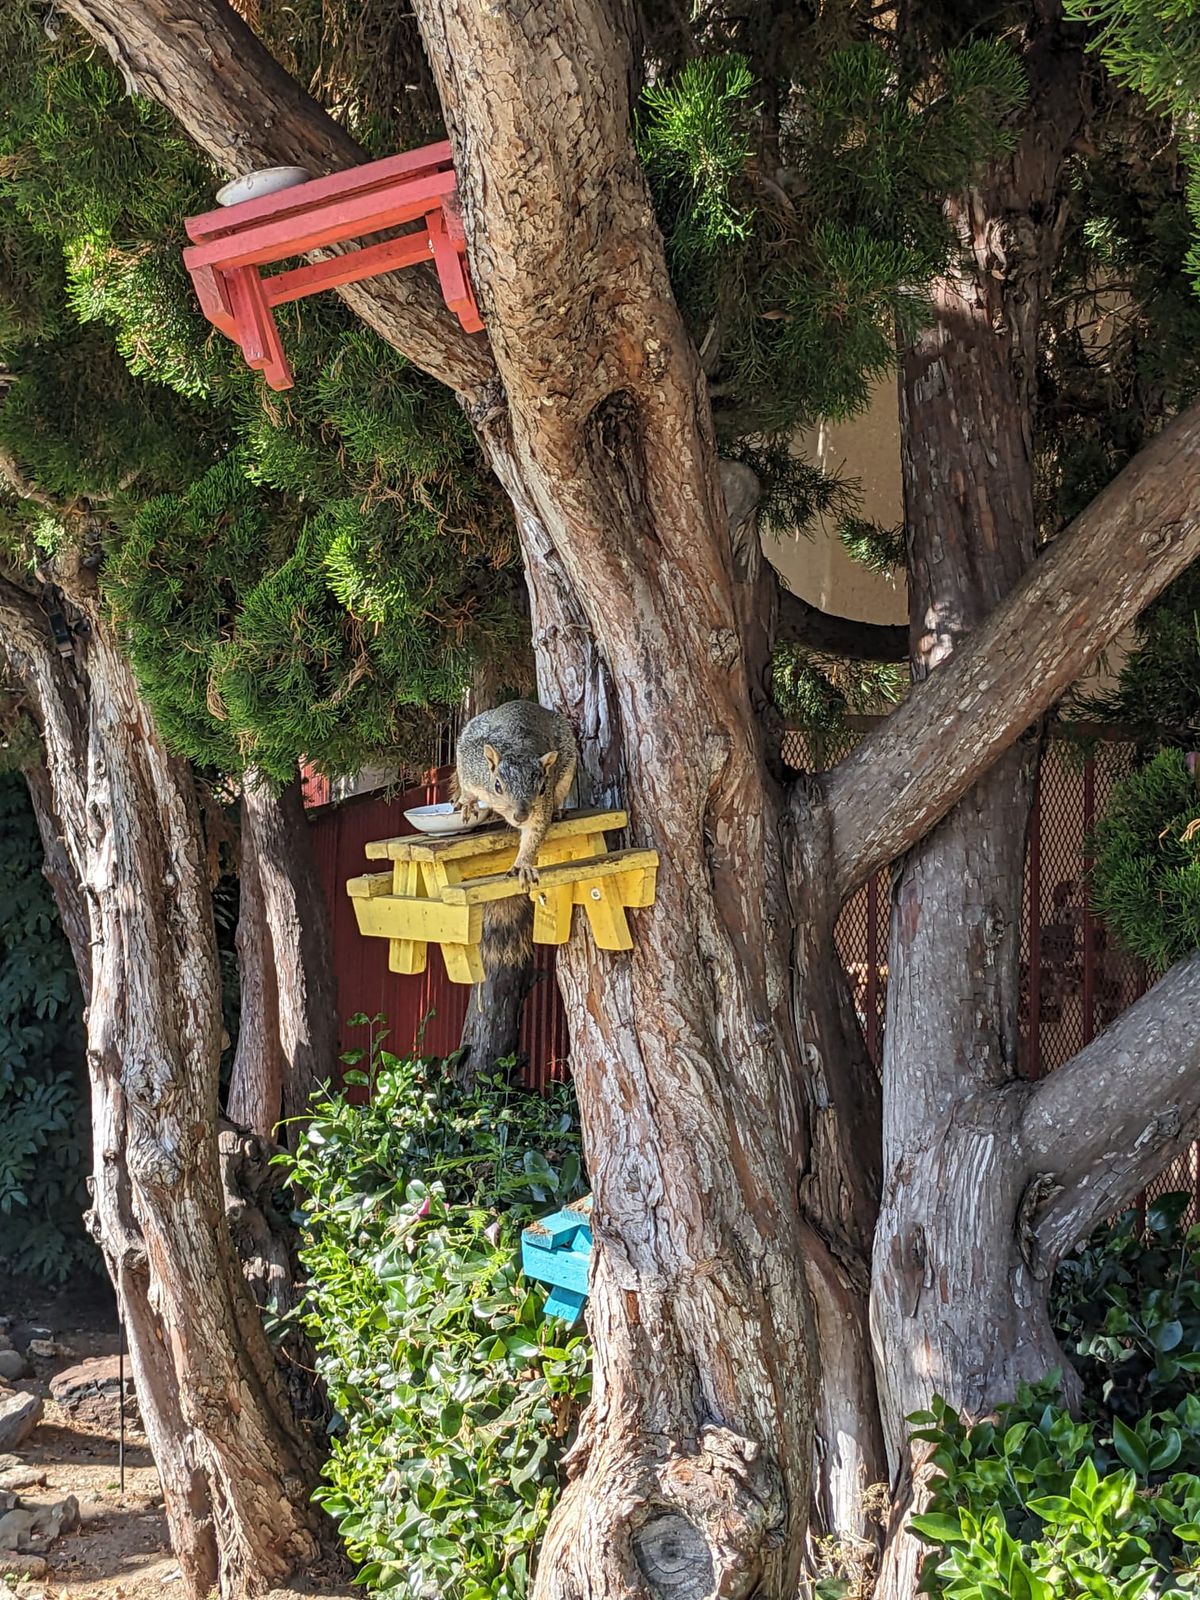 Three miniature picnic tables in red, yellow, and cyan affixed to a tree. A squirrel is on the yellow table.